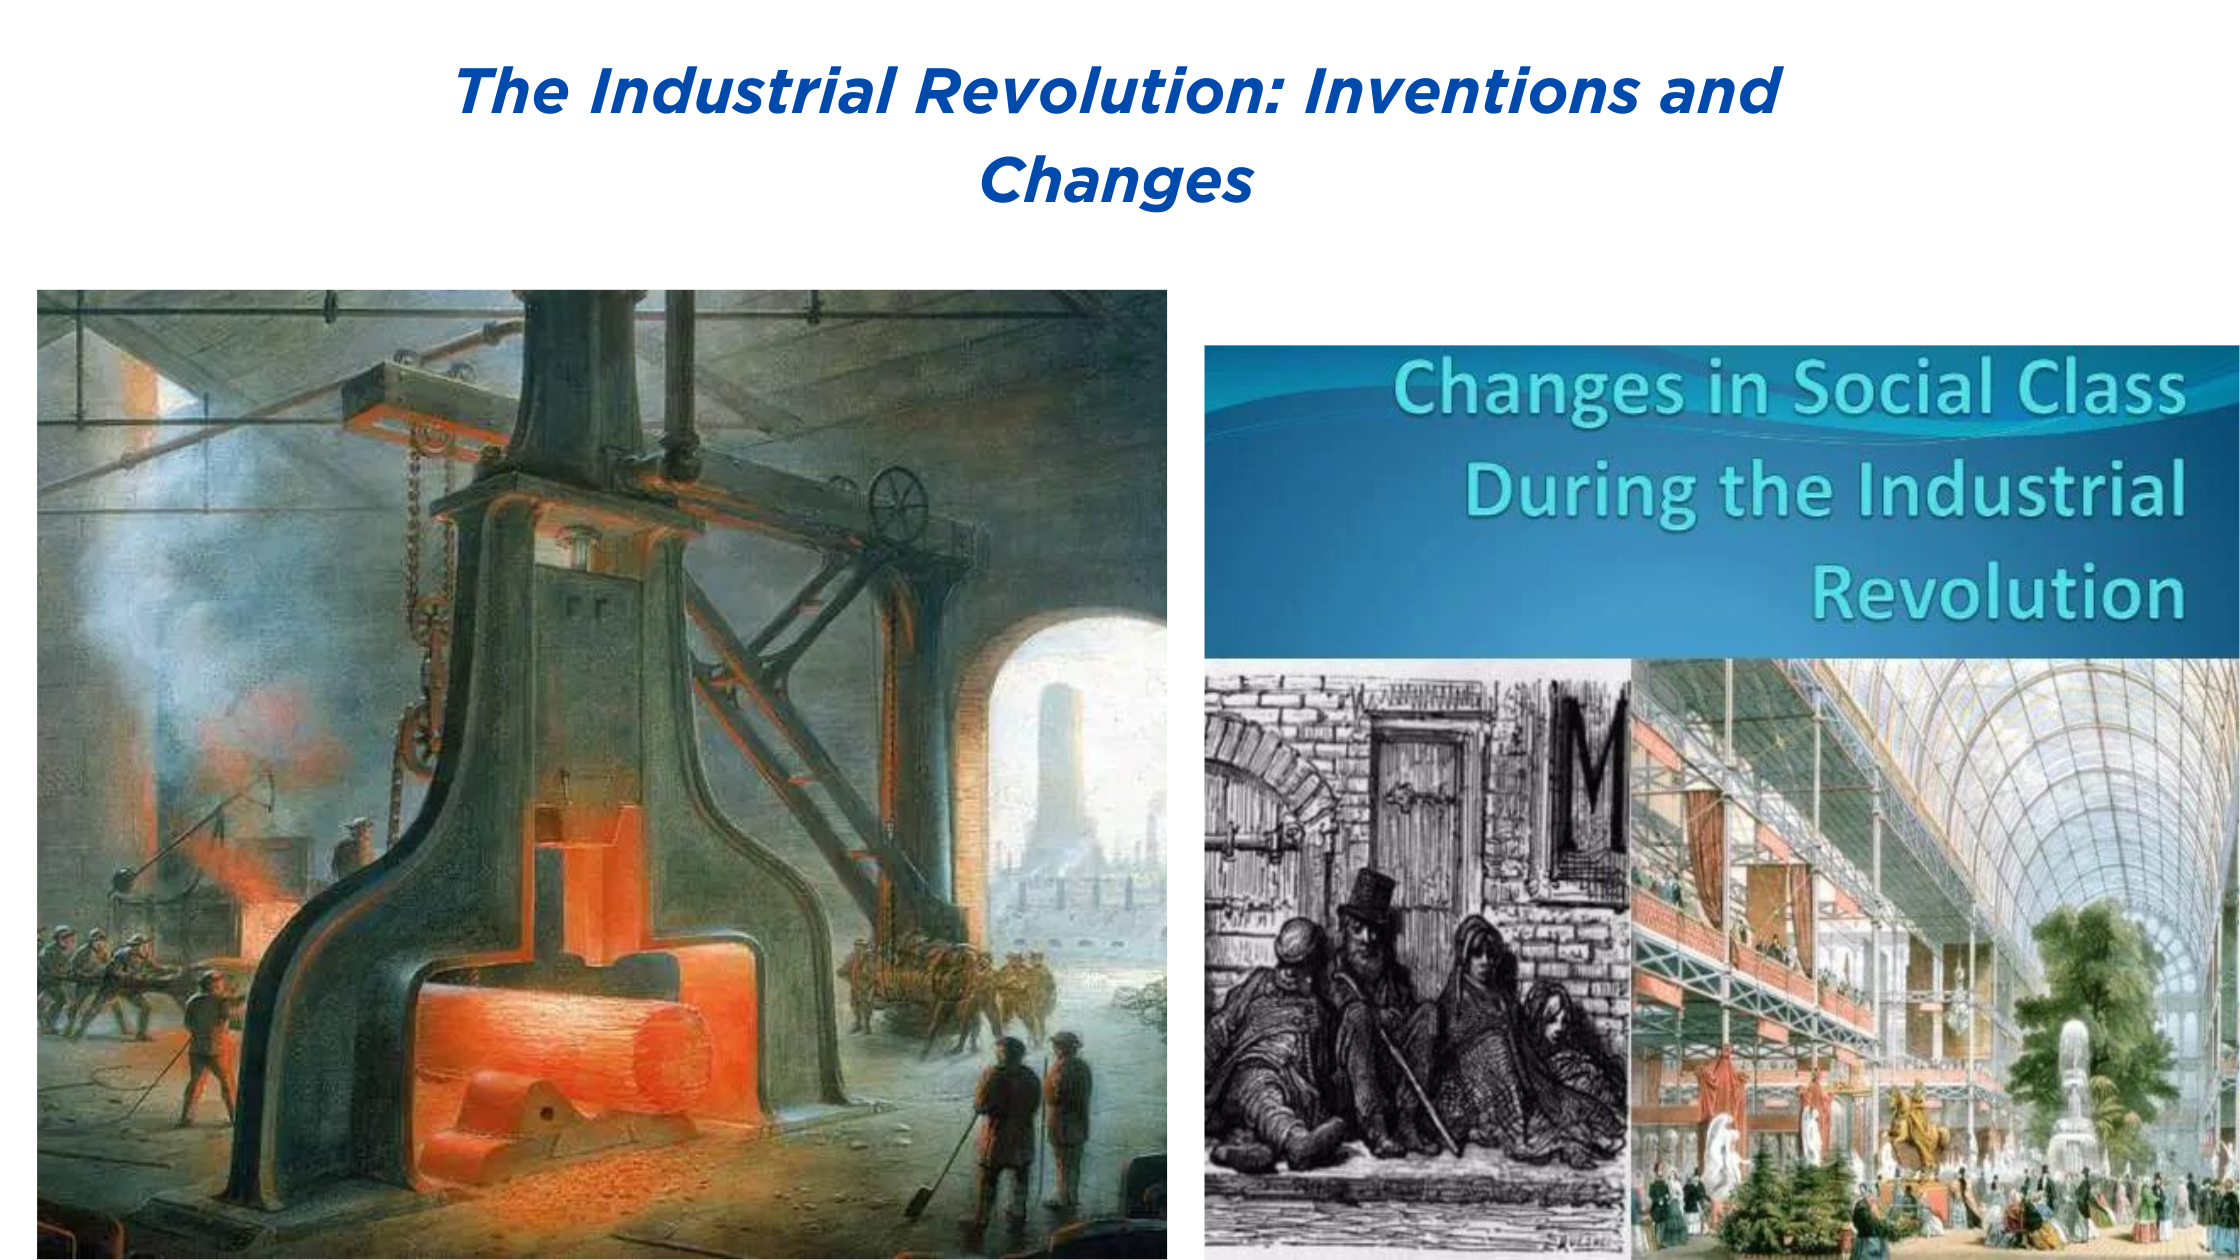 The Industrial Revolution: Inventions and Changes